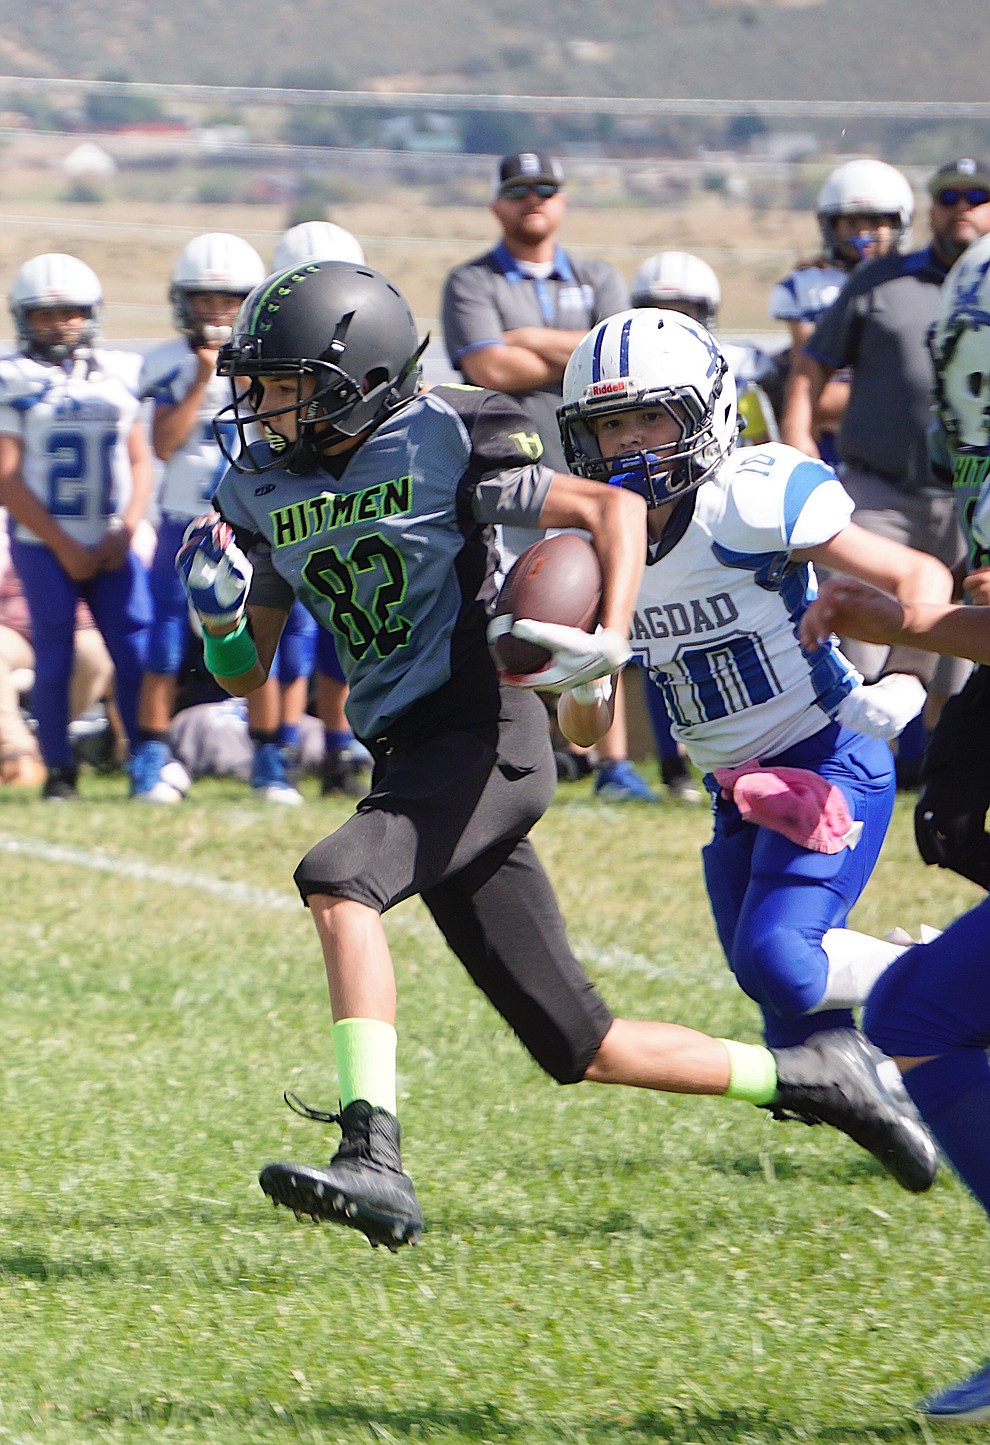 Brody Fry-Ryan (82) of the Prescott Valley Hitmen Majors team runs the ball during their game against Bagdad on Saturday, Sept. 28, 2019, at Bradshaw Mountain Middle School. (Aaron Valdez/Courier)